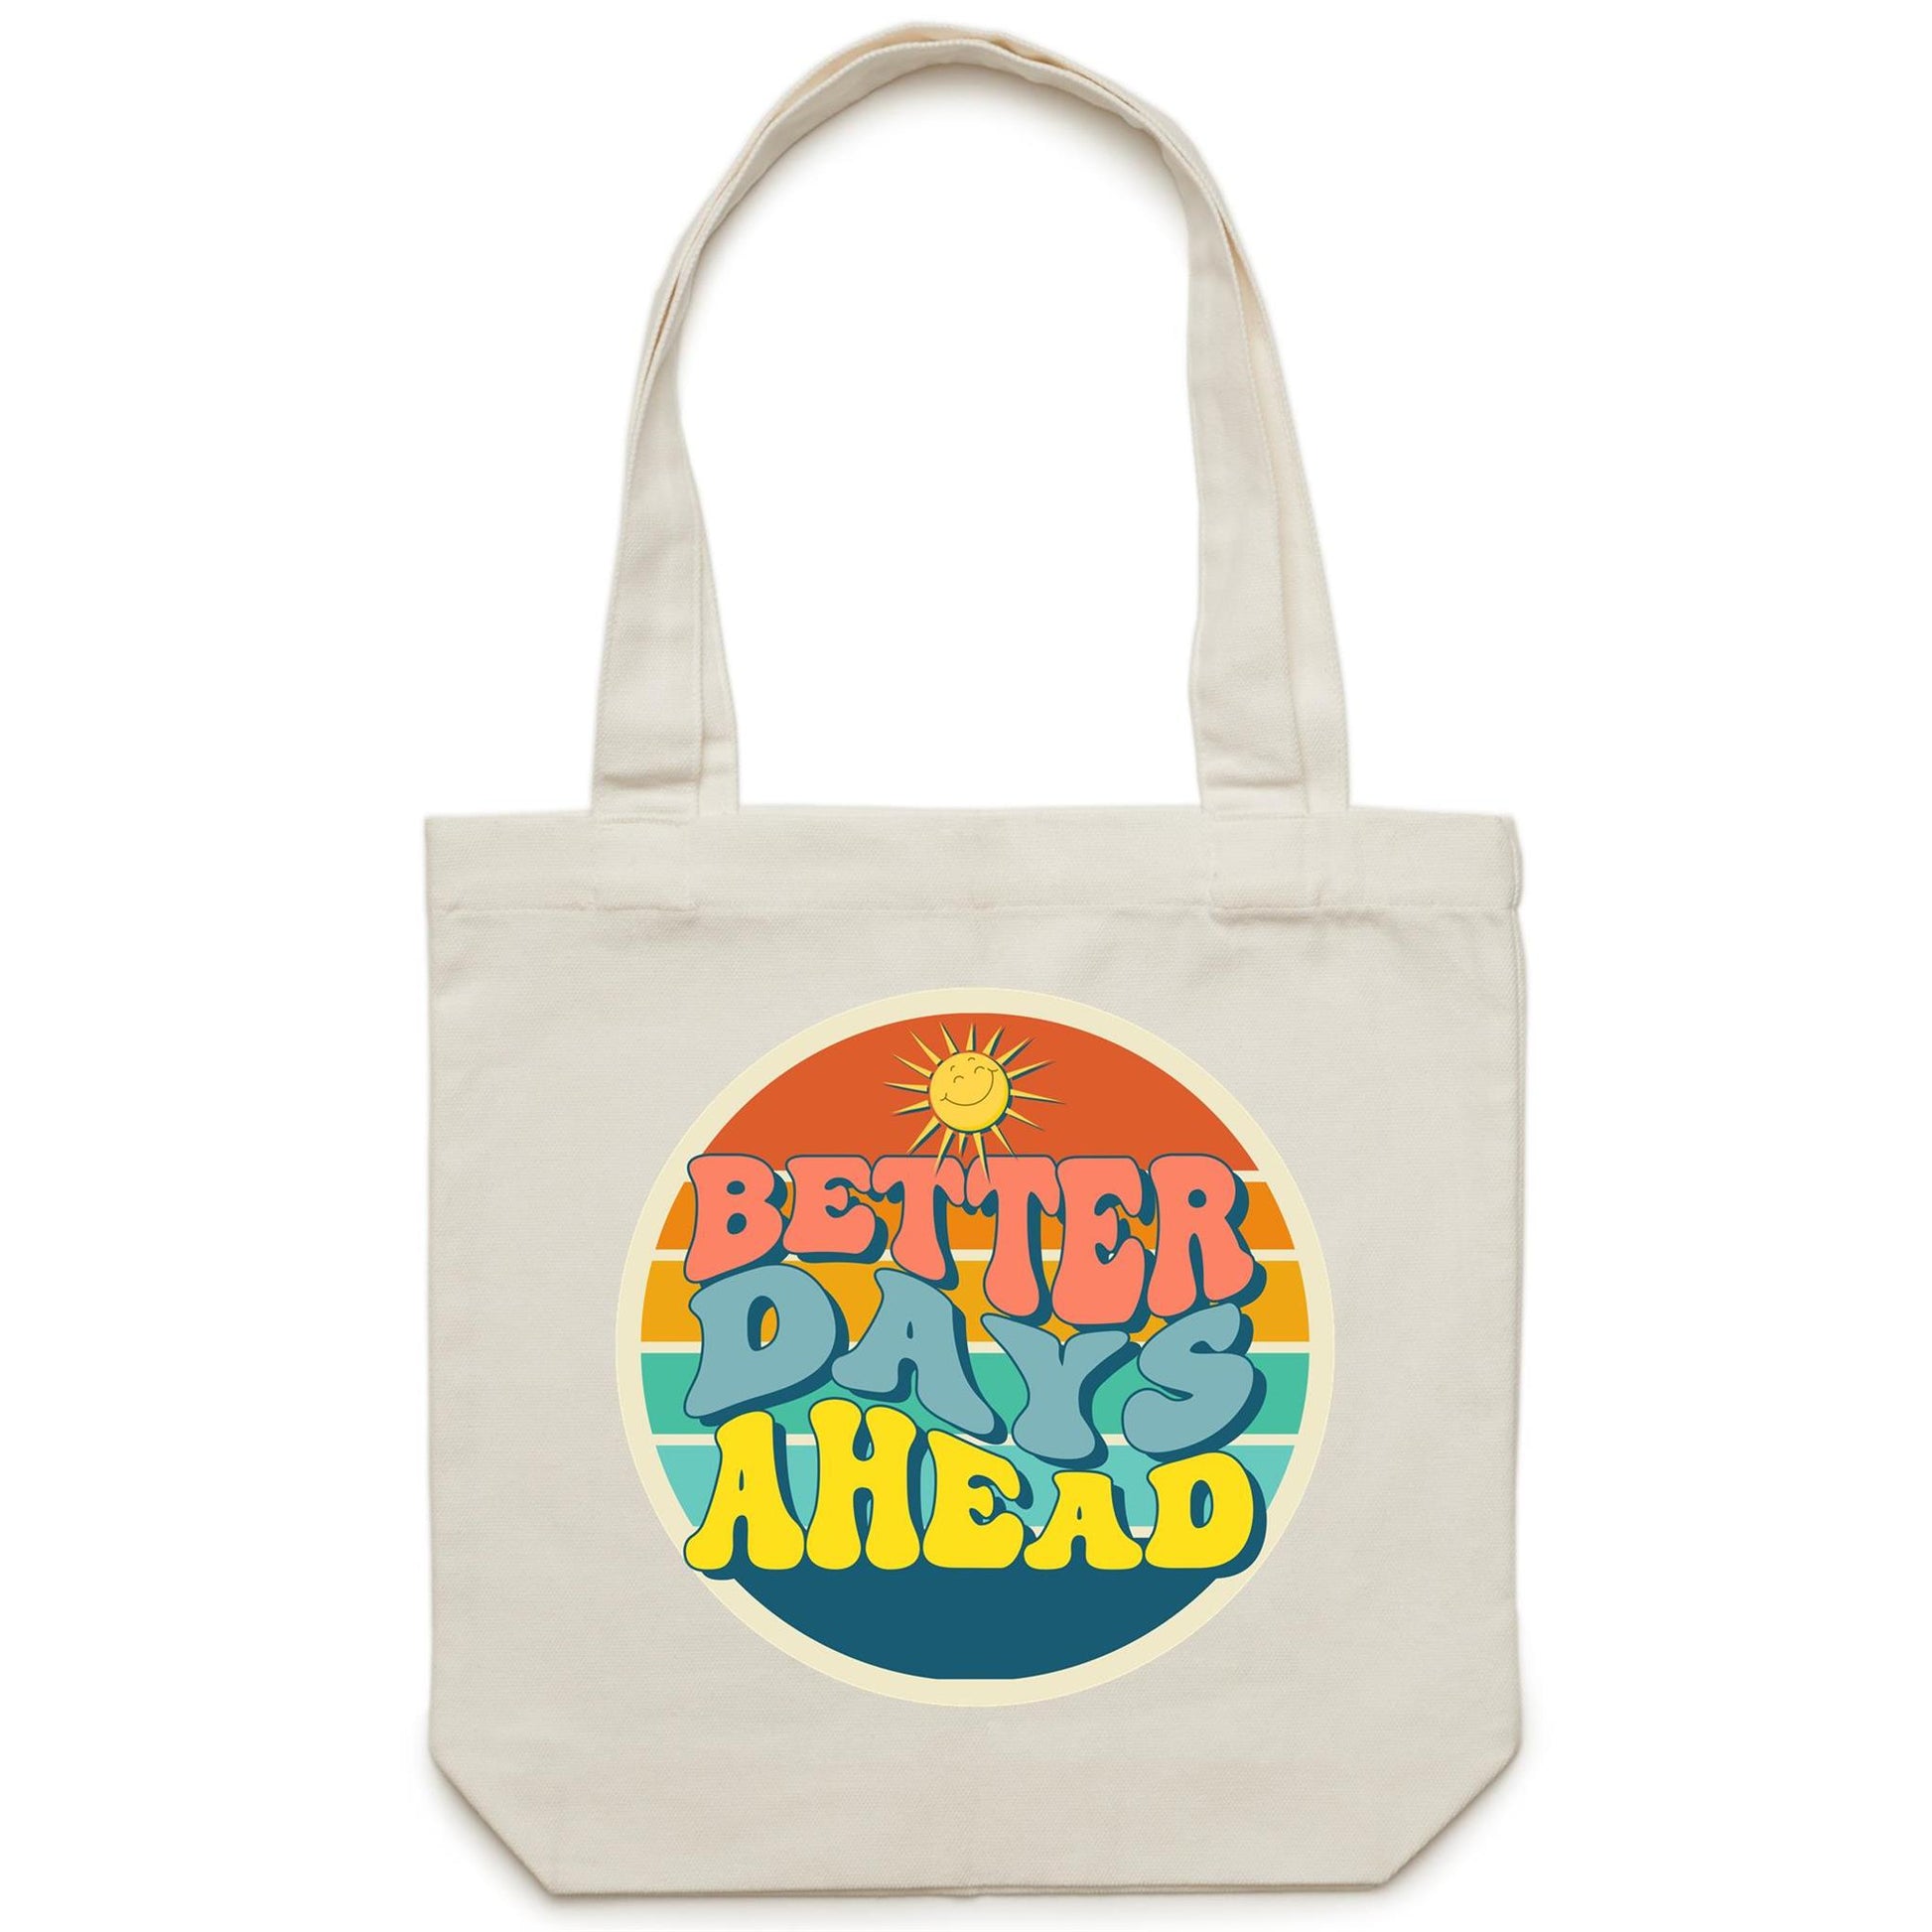 Better Days Ahead - Canvas Tote Bag Cream One Size Tote Bag Motivation Retro